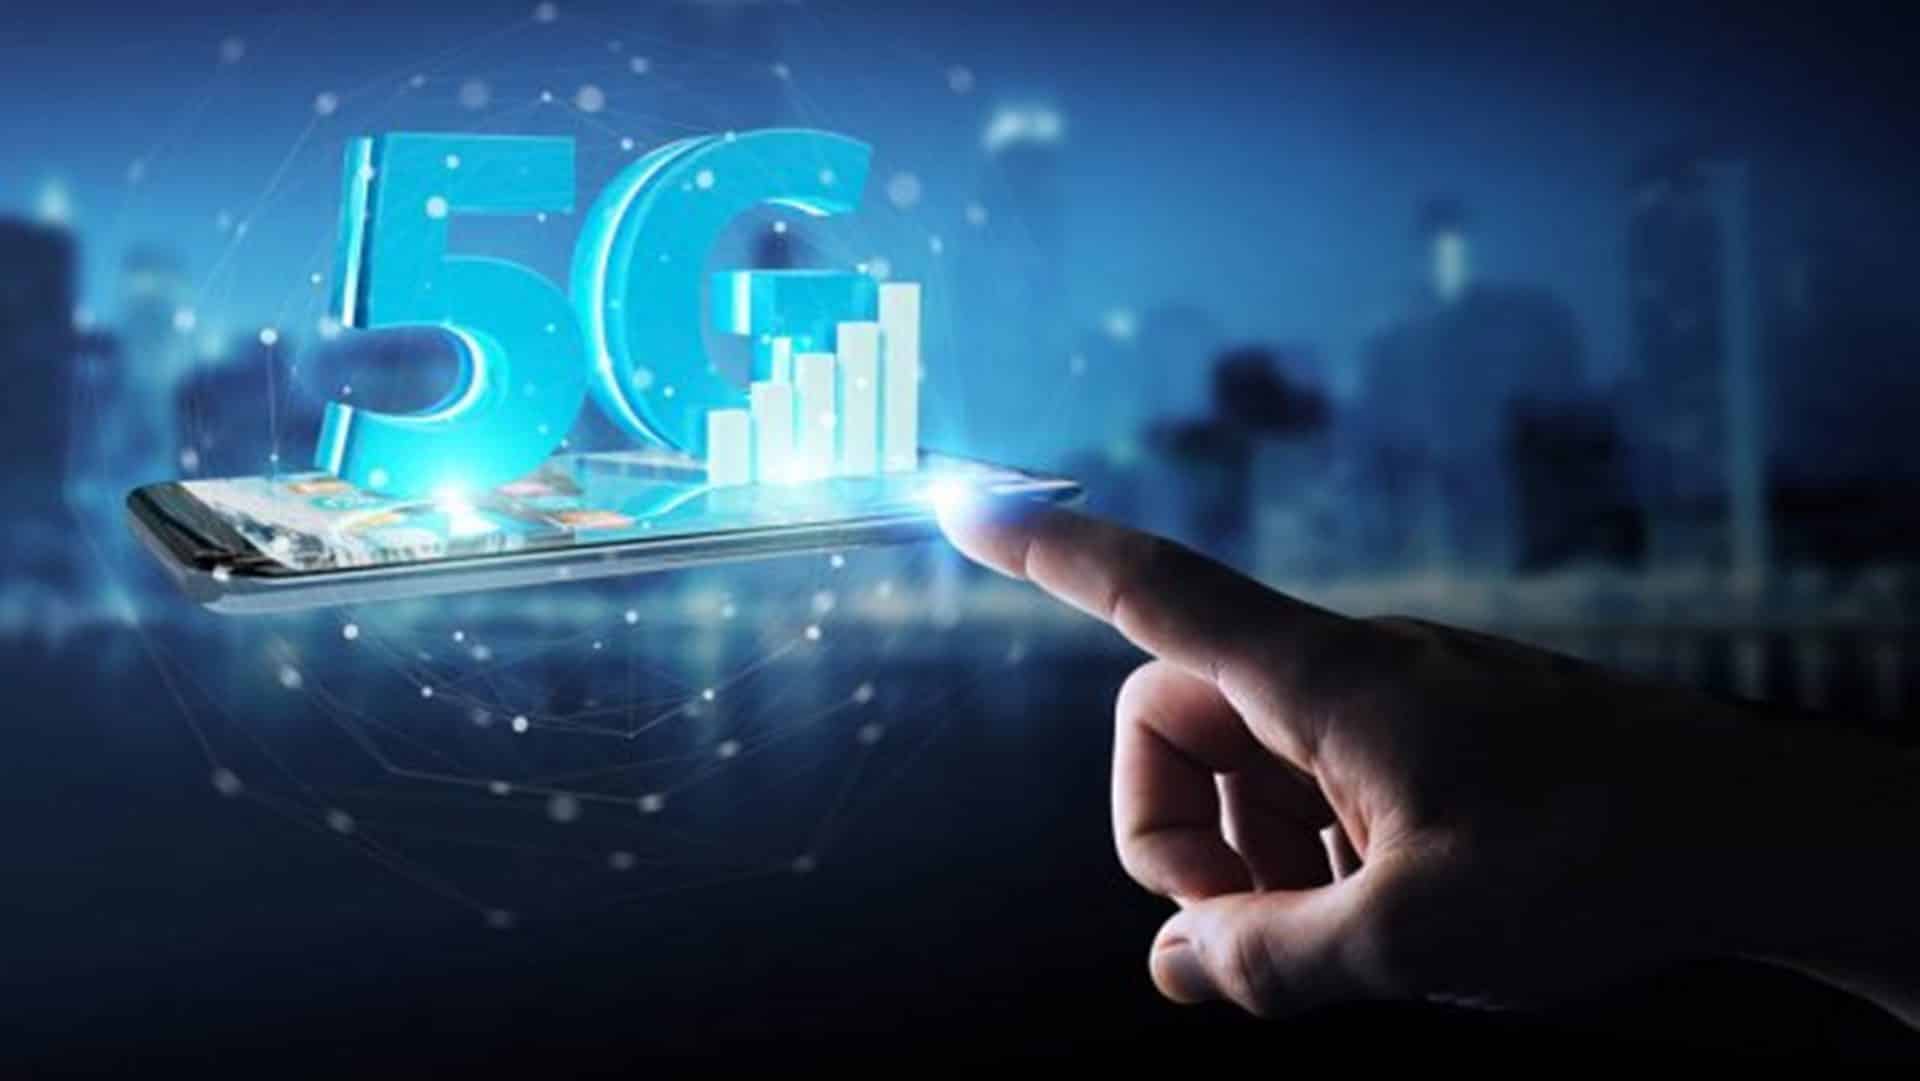 India may have 330 mn 5G subscribers by 2026,